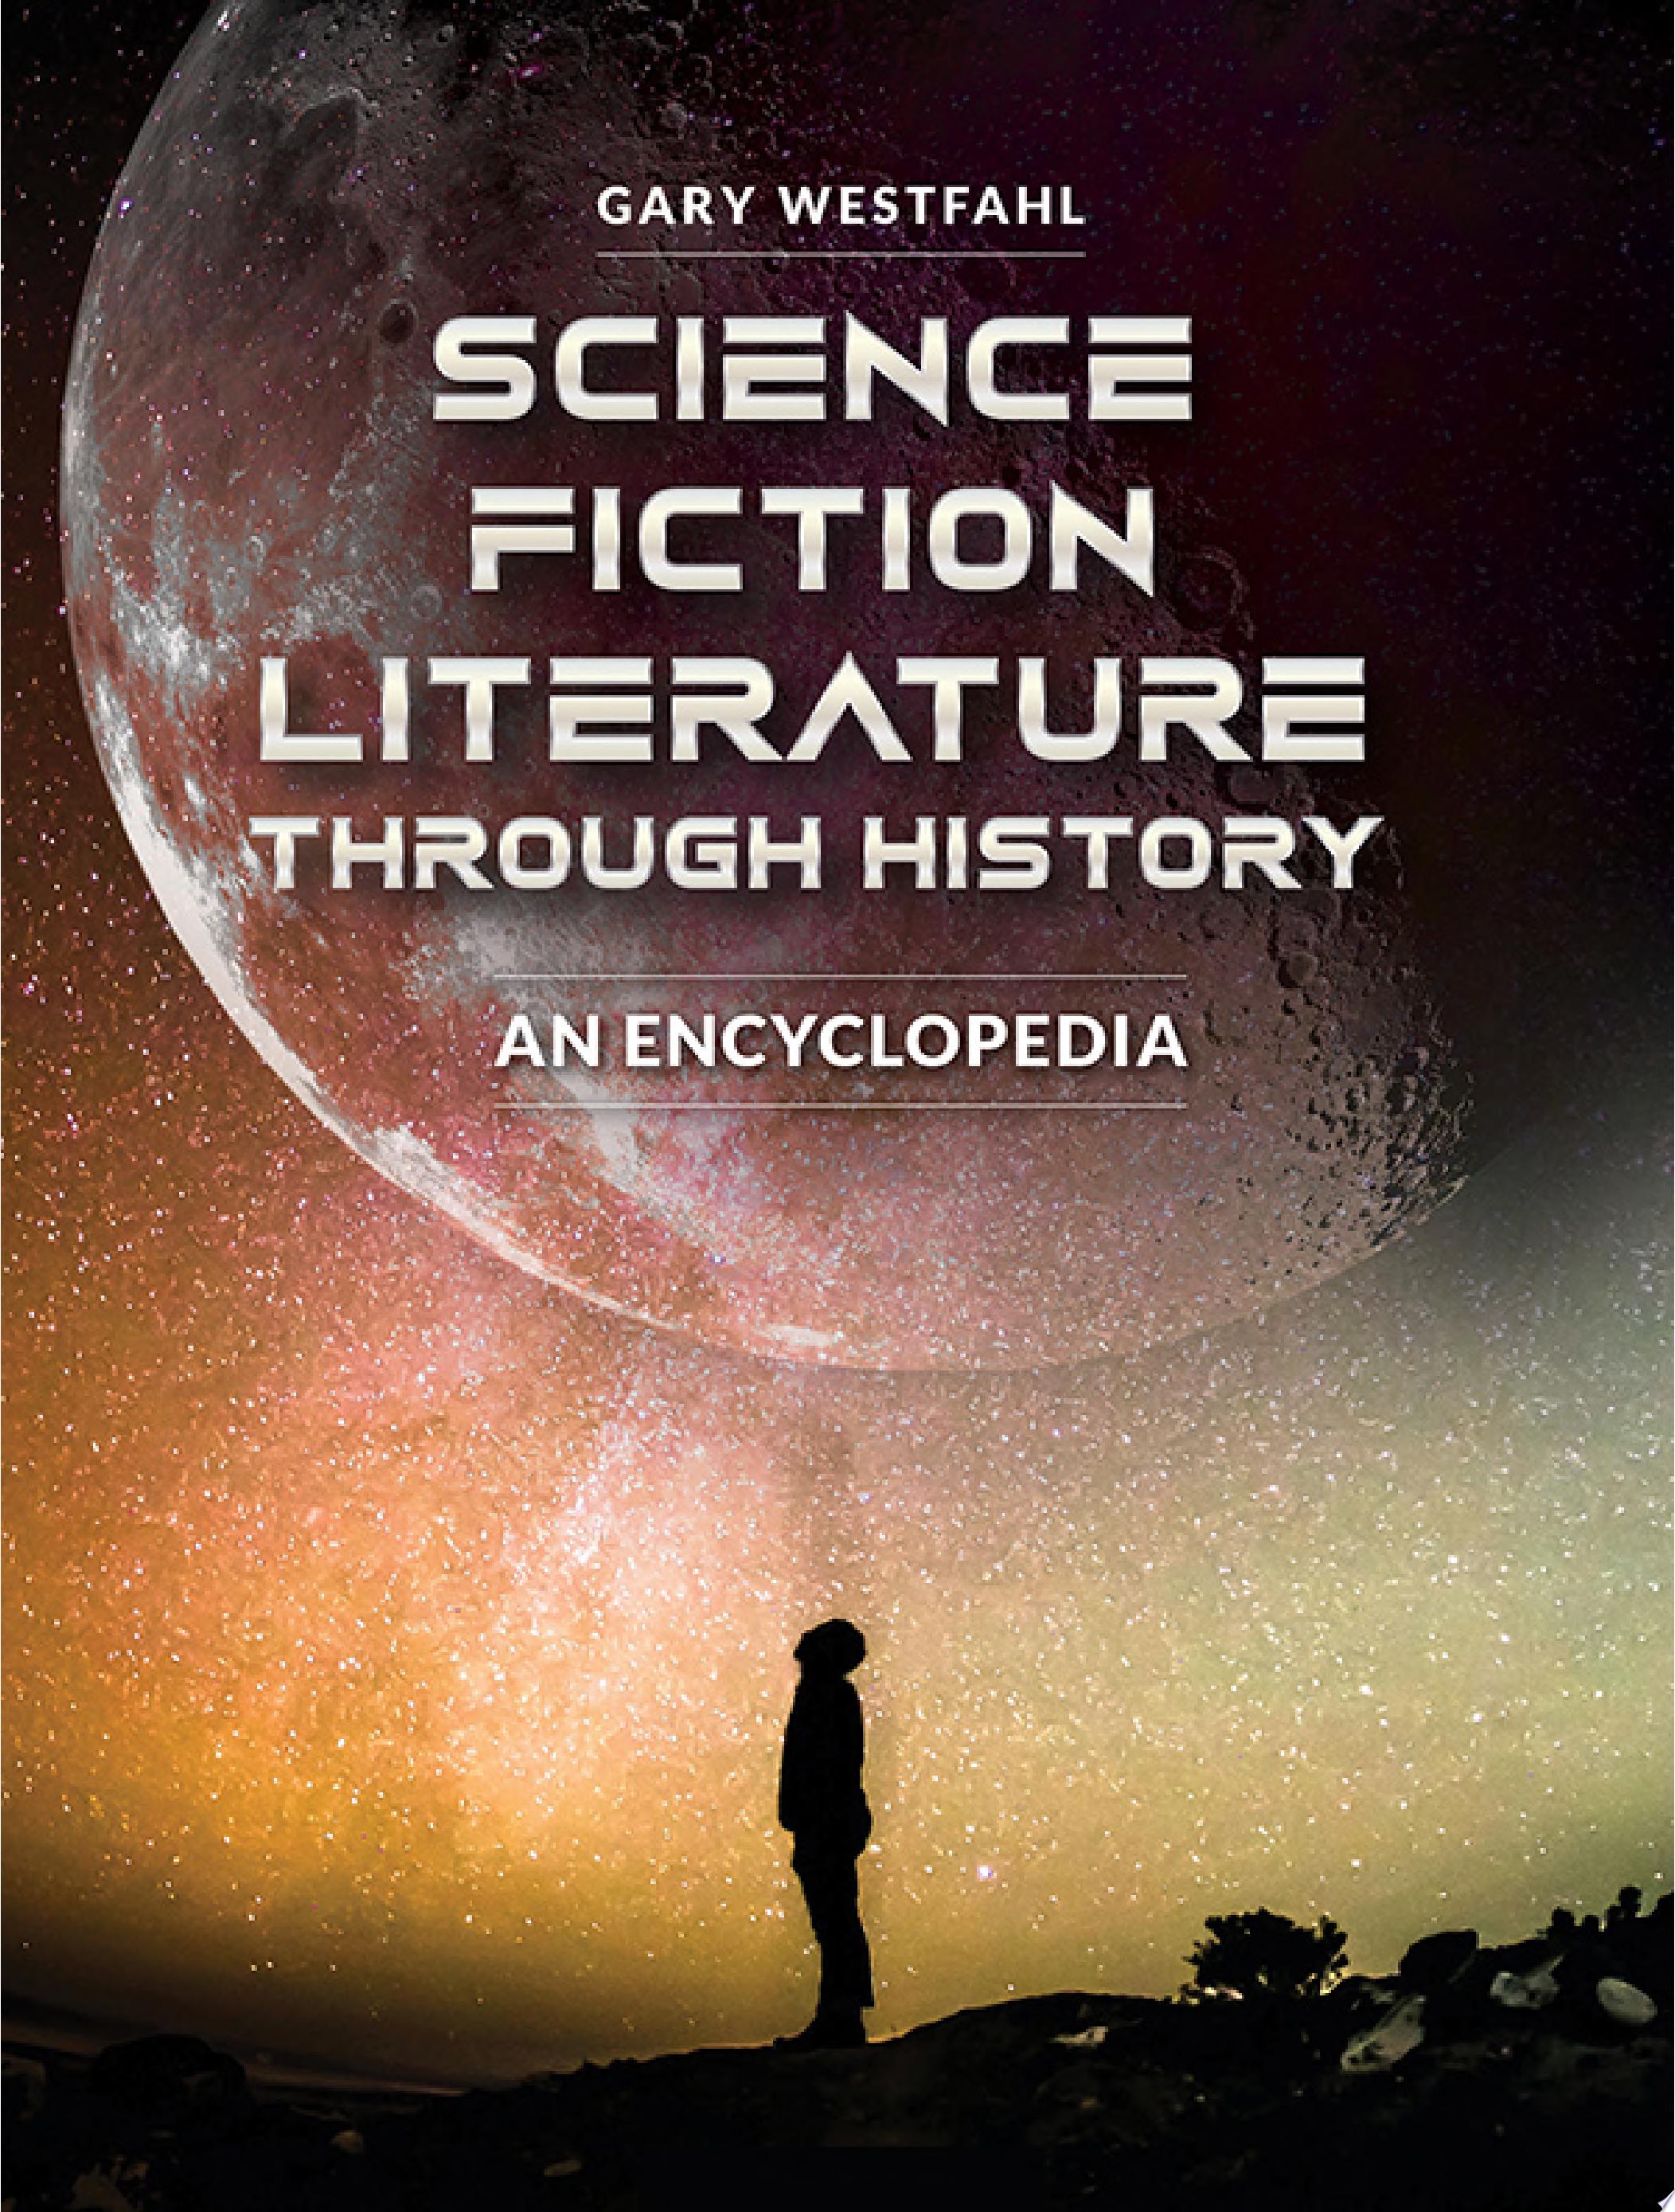 Image for "Science Fiction Literature through History: An Encyclopedia [2 volumes]"